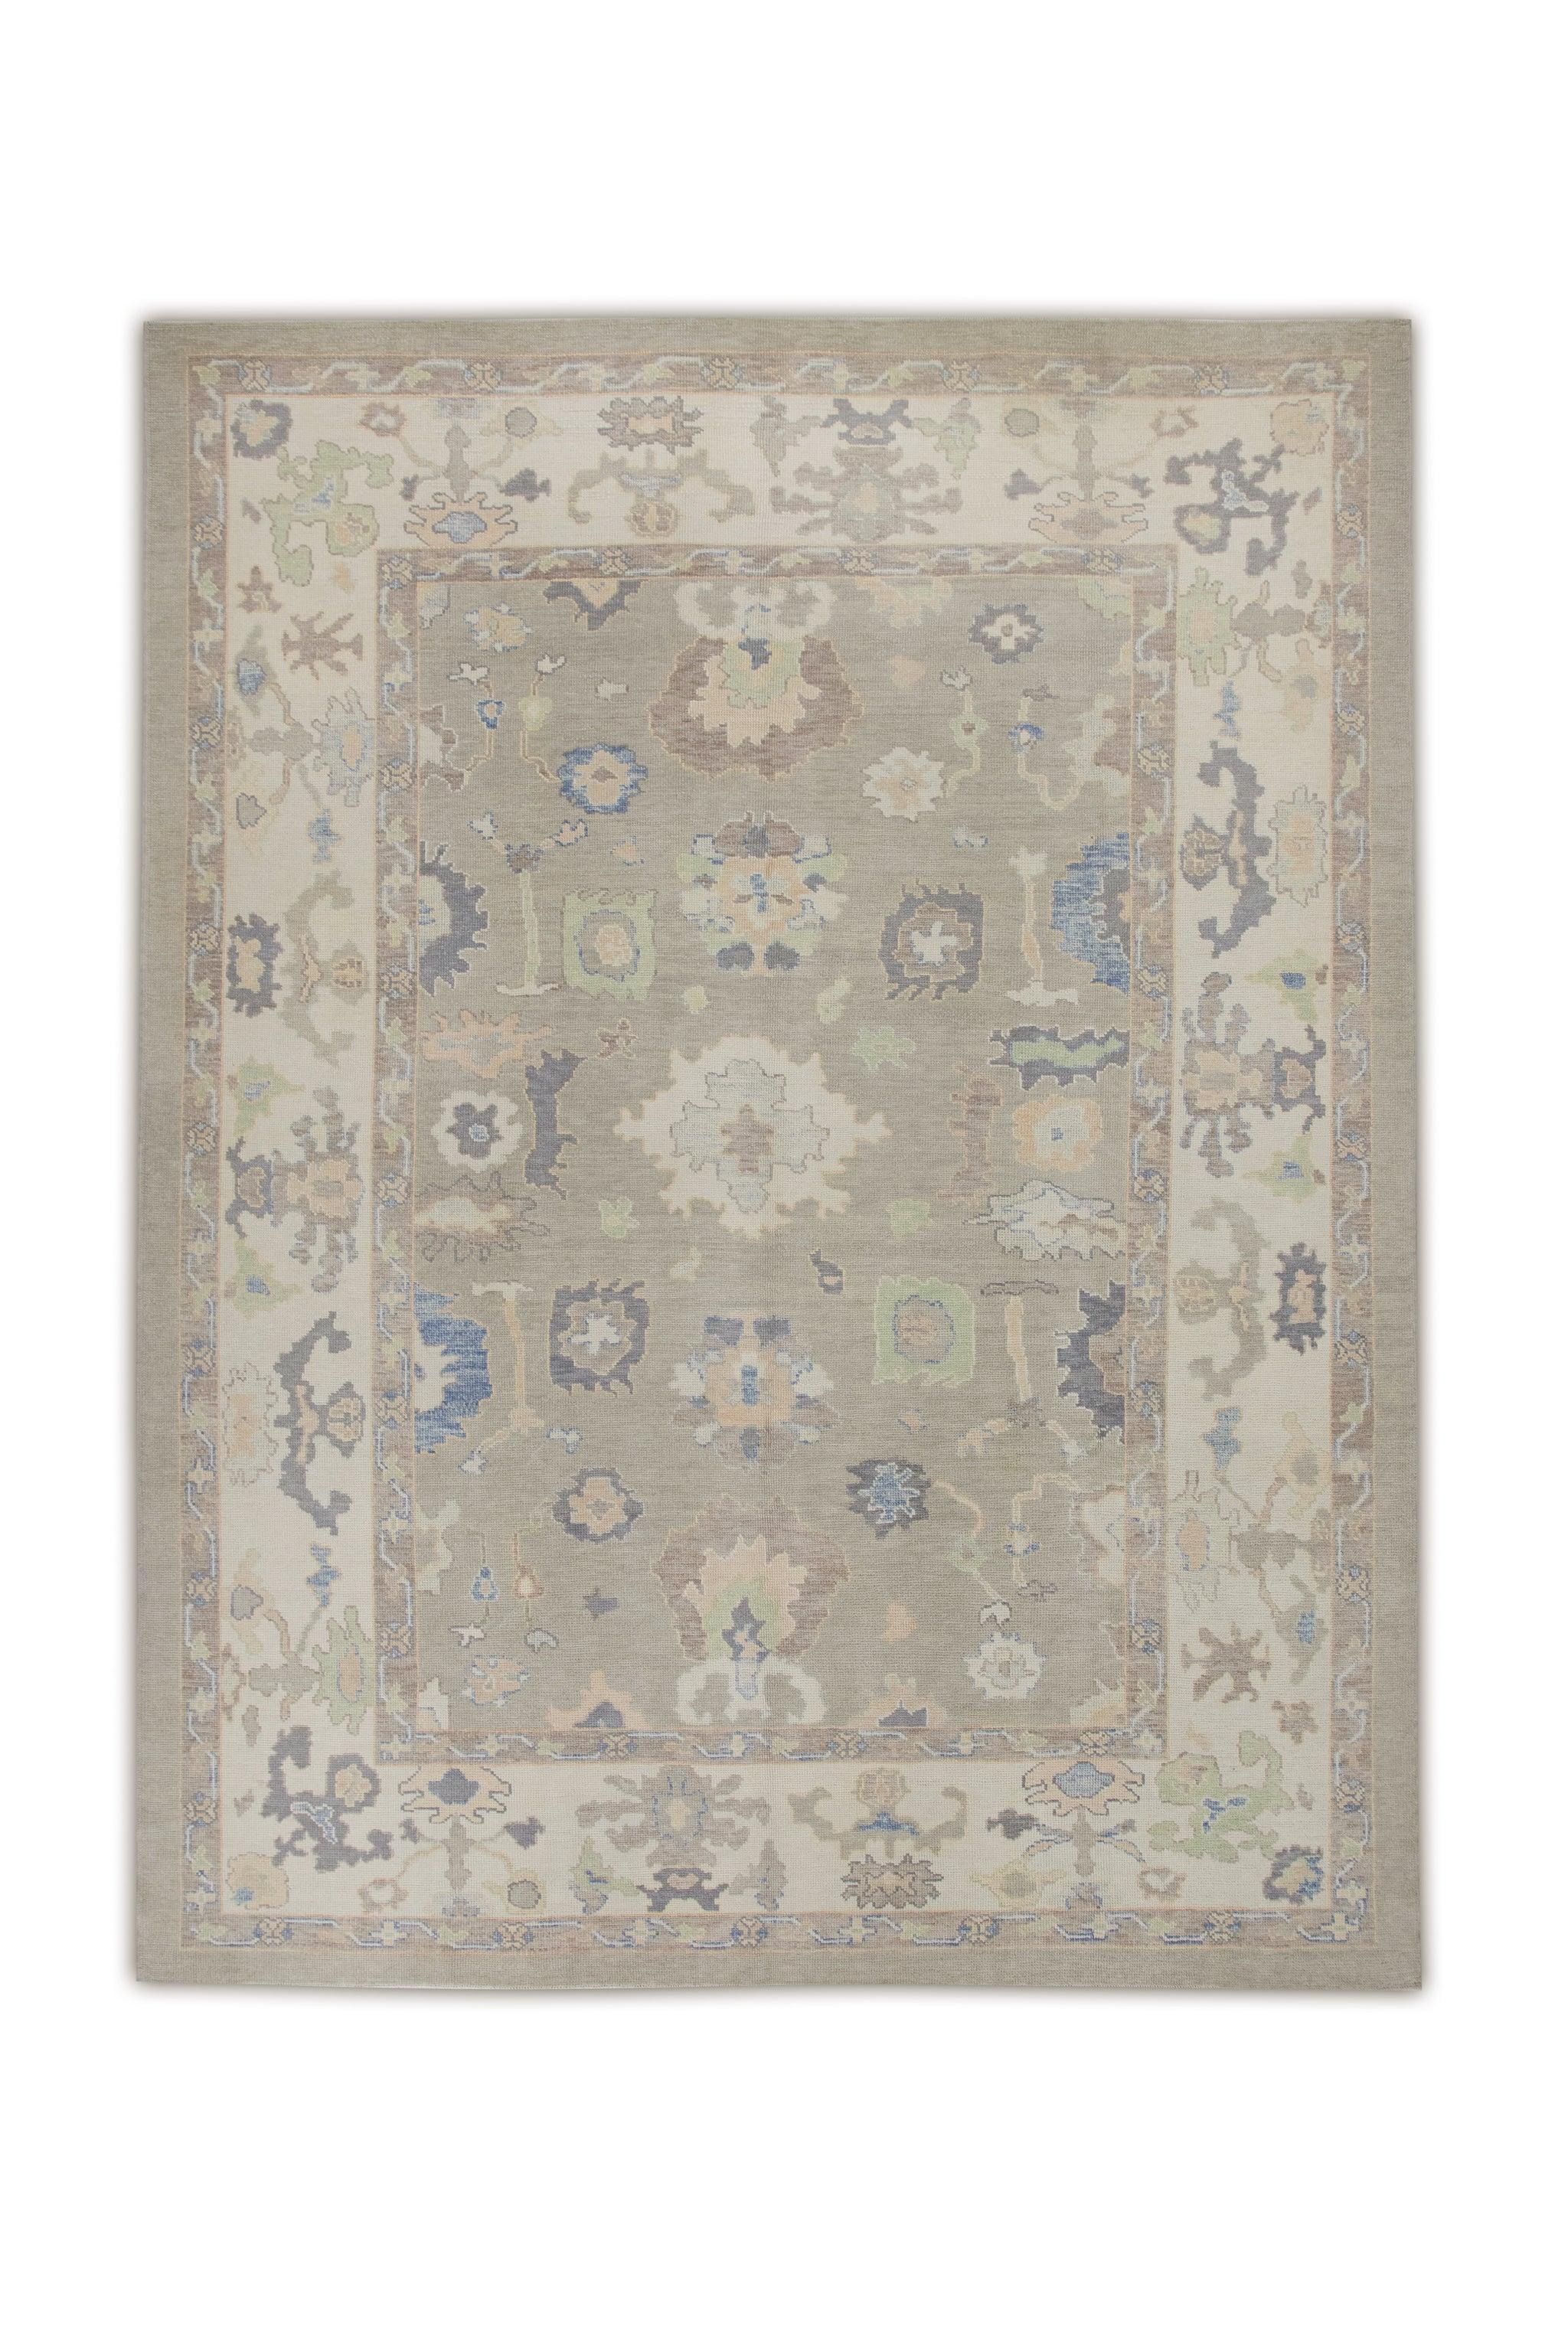 Oriental Hand Knotted Turkish Oushak Rug 9'1" x 12' #7127 For Sale